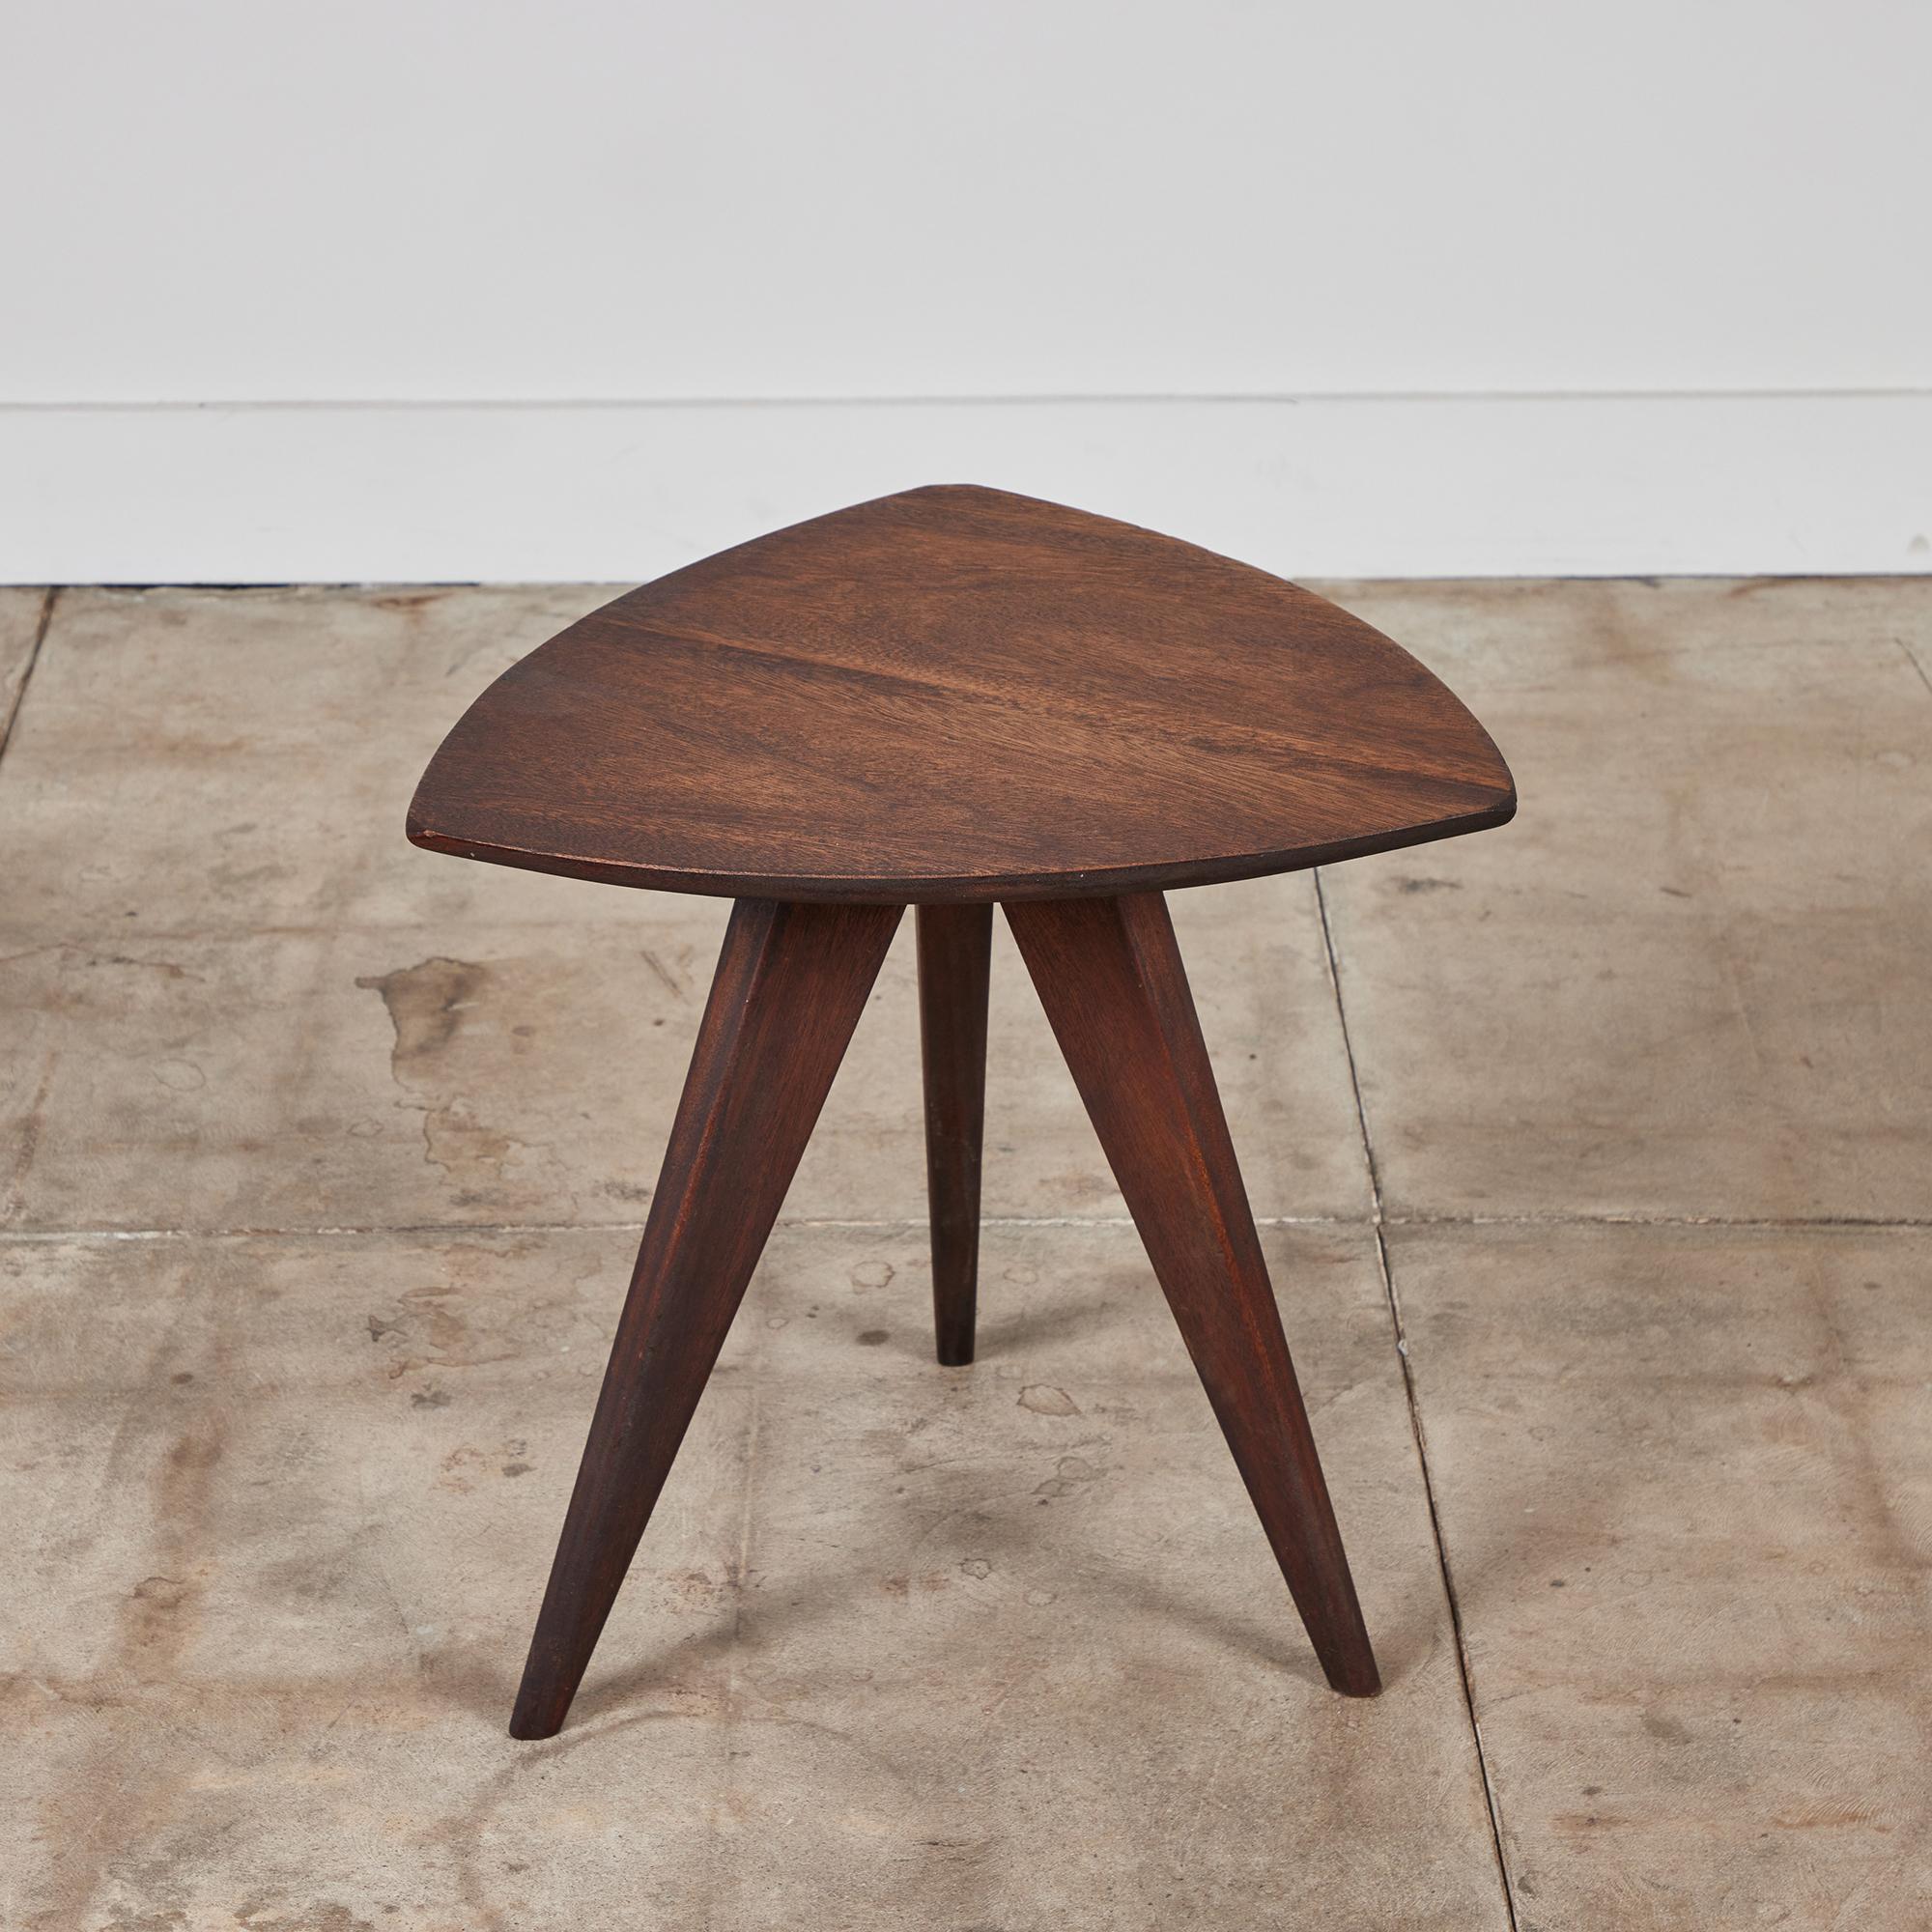 Side table by Paul Laszlo for Glenn of California, c.1950s. The table features an oiled mahogany triangular table top and base. The table sits atop three tapered angled legs.

Dimensions
20